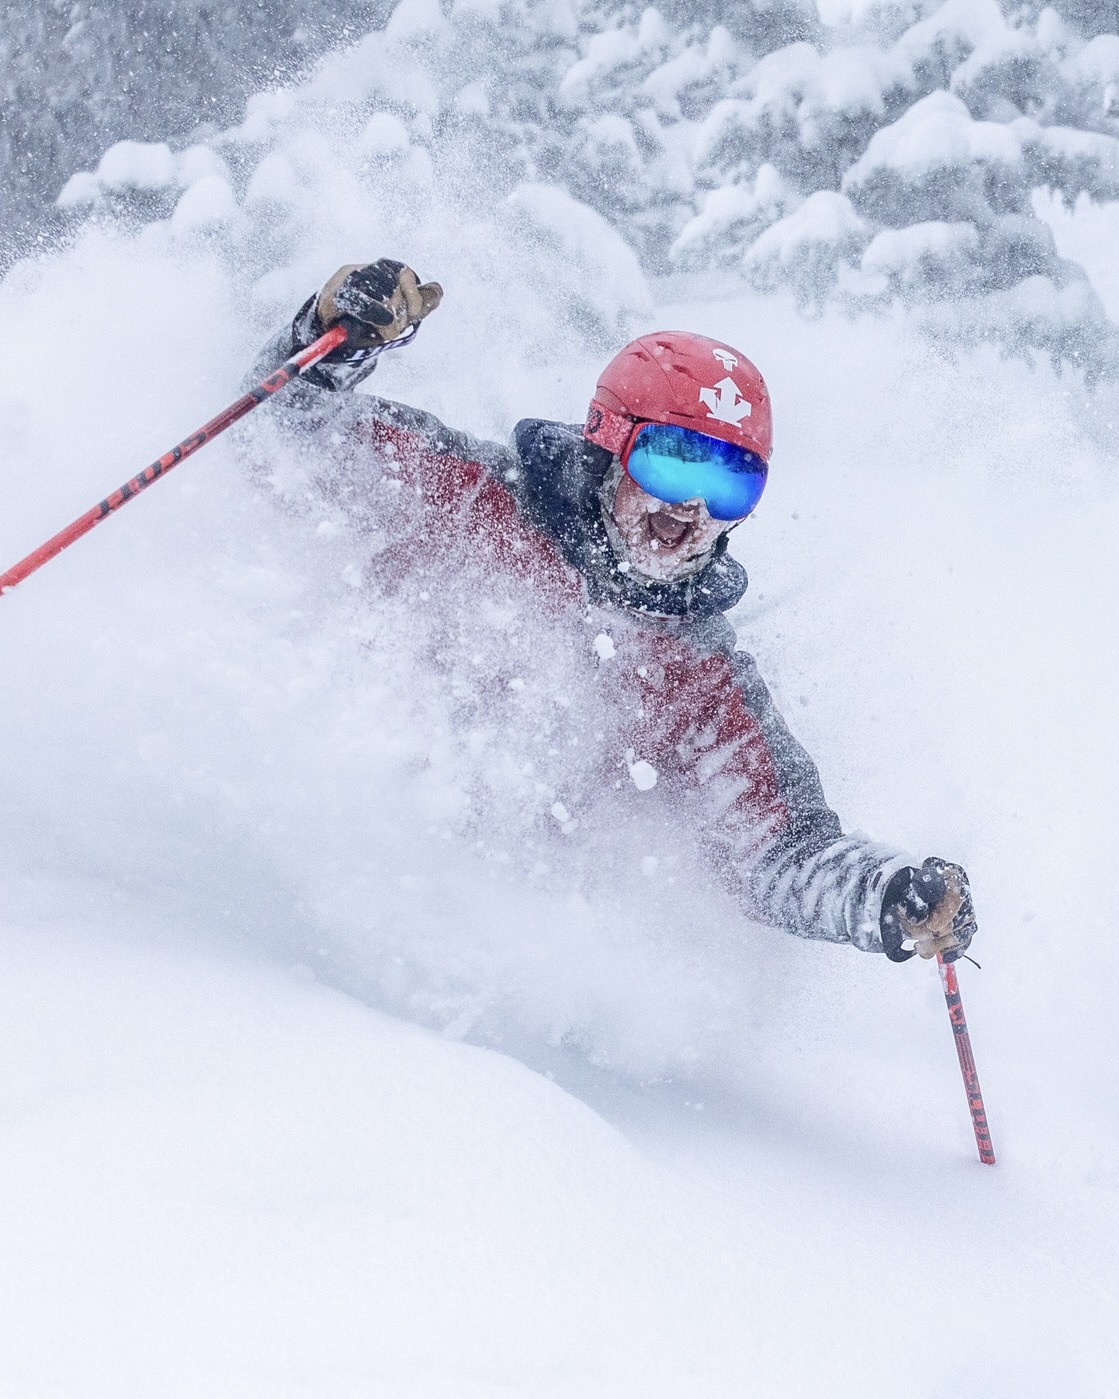 An image of a skier deep in powder at Mission Ridge